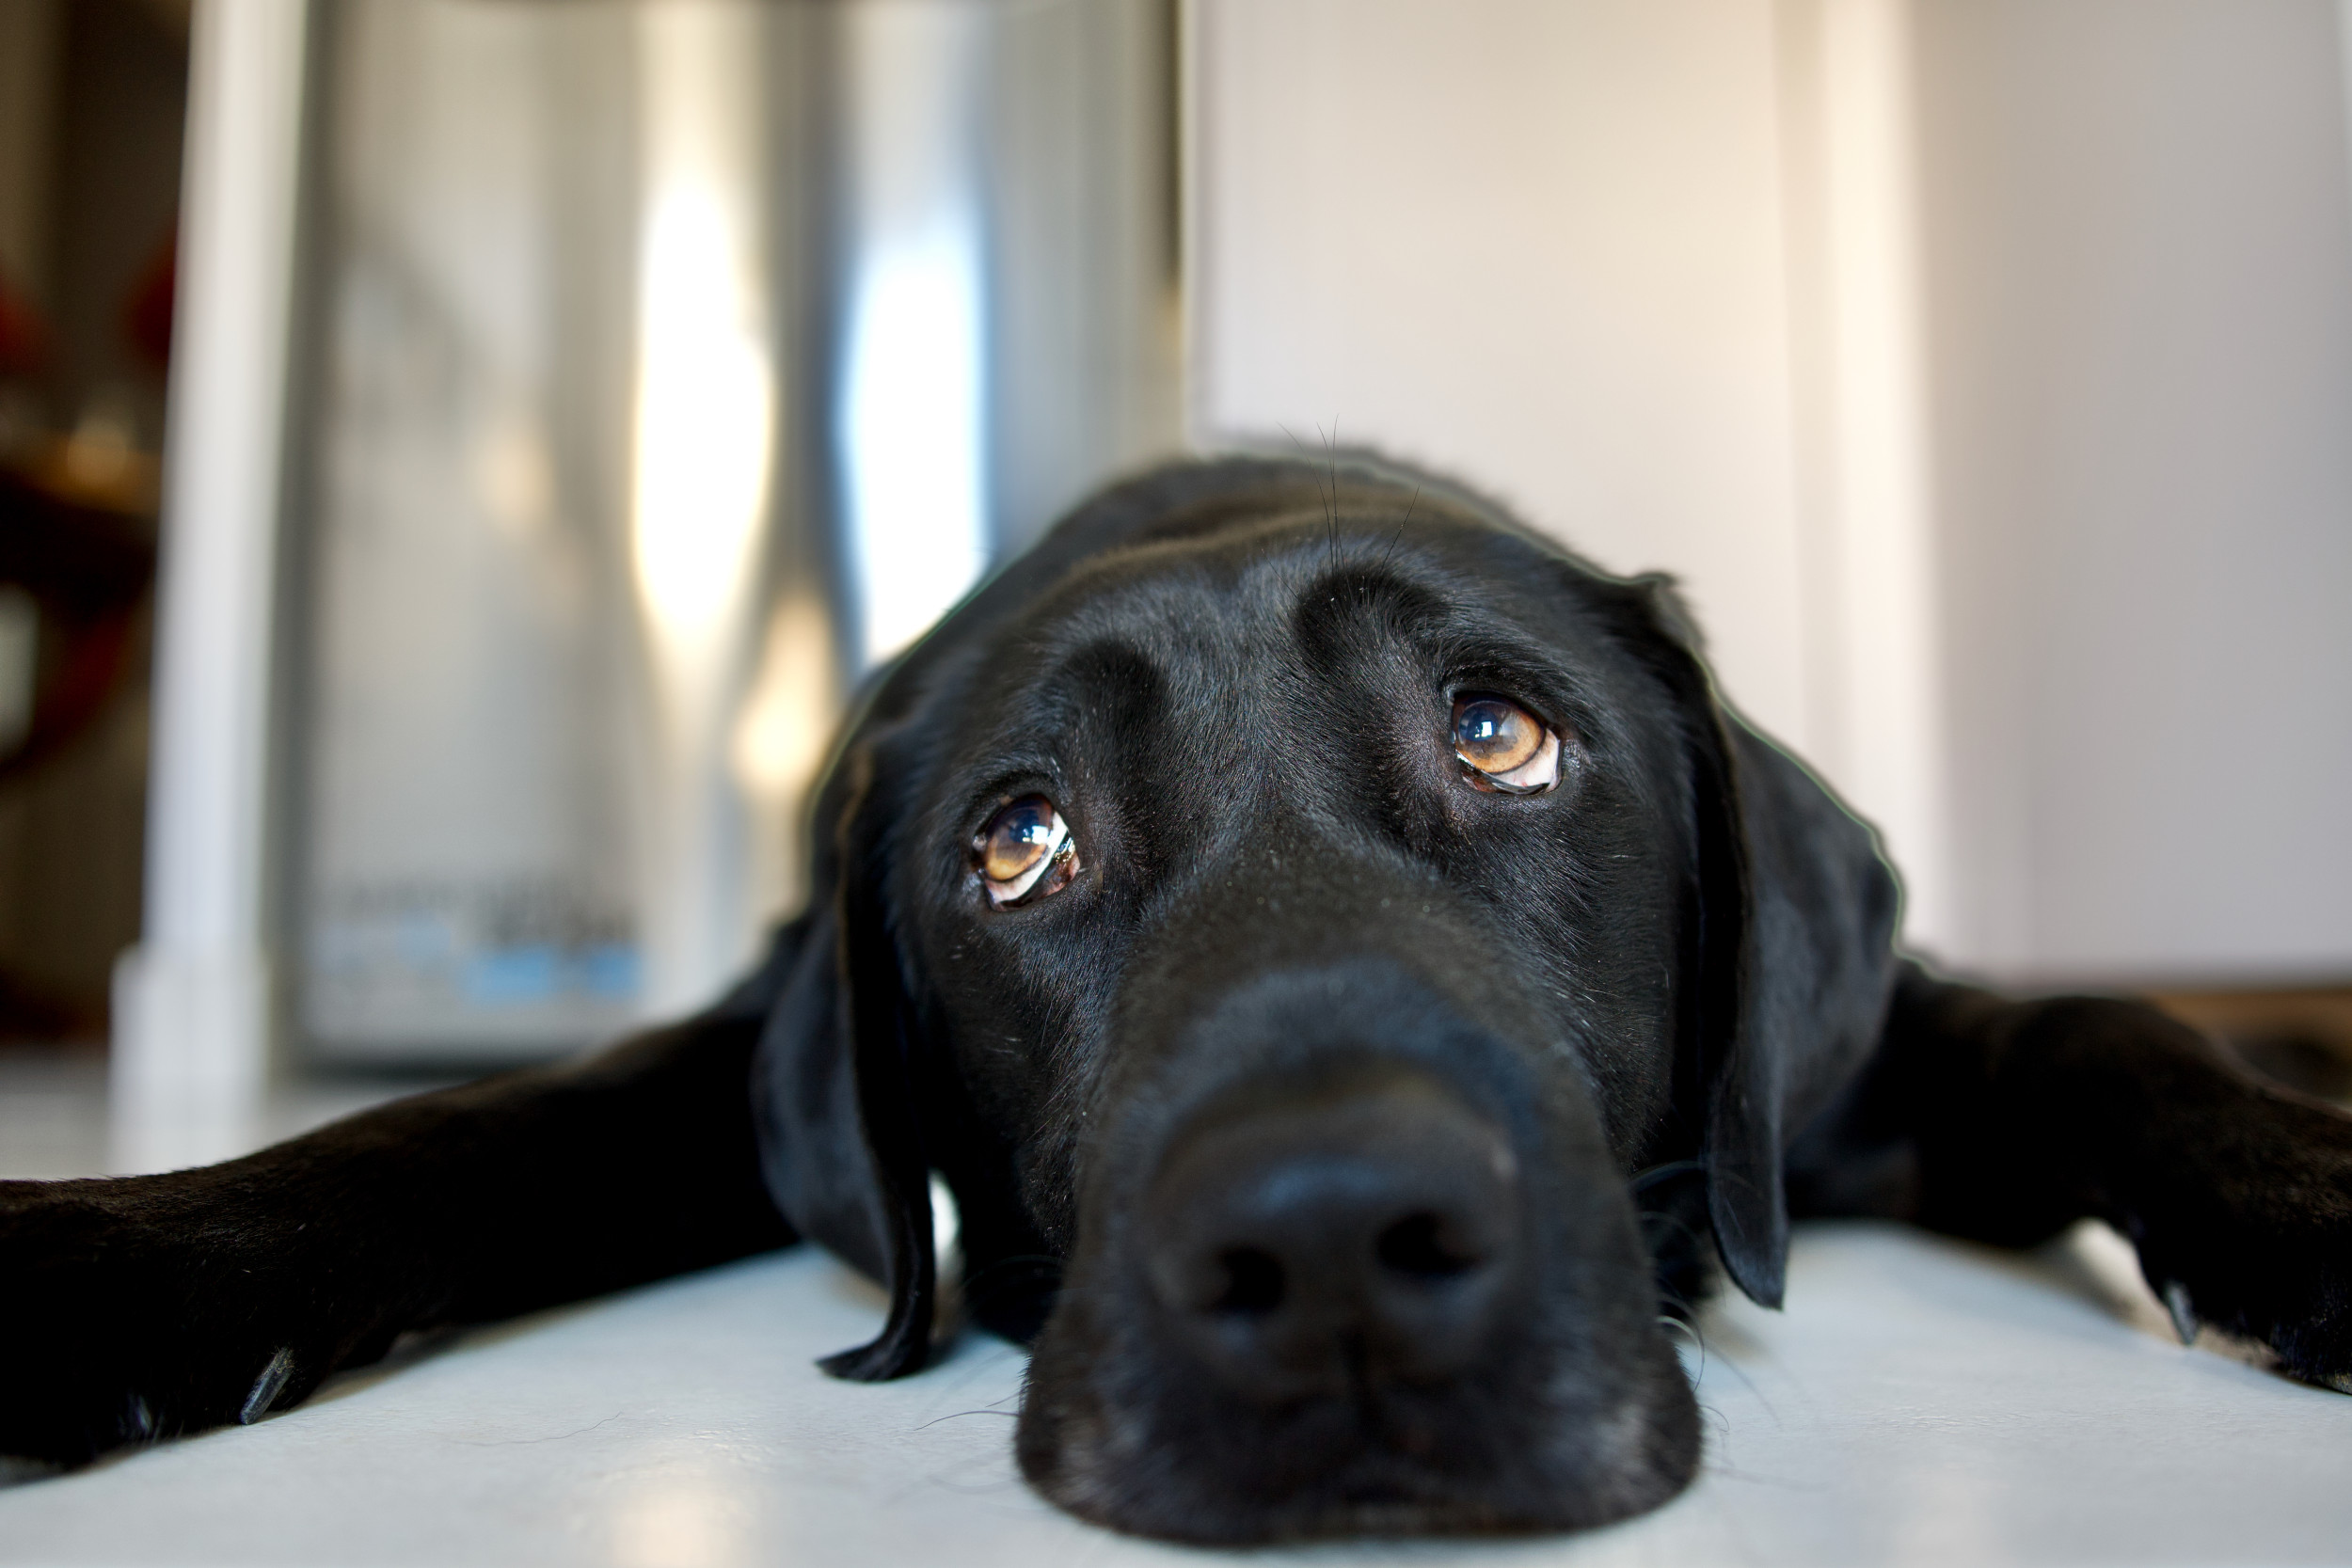 Labrador Absolutely Failing Food Test by Owner Has Internet in Stitches